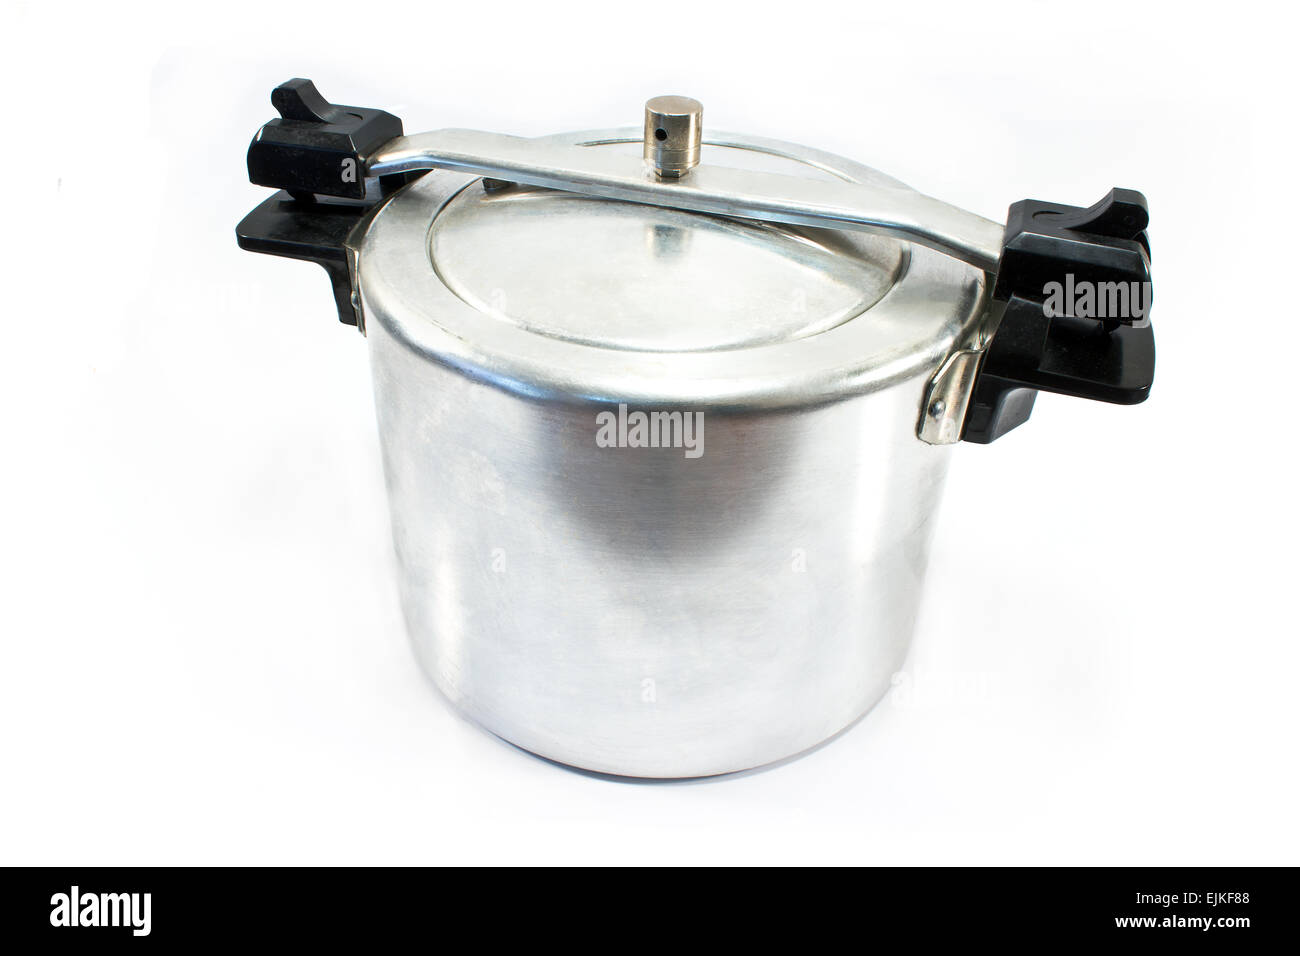 High pressure aluminum cooking pot isolated on white Stock Photo